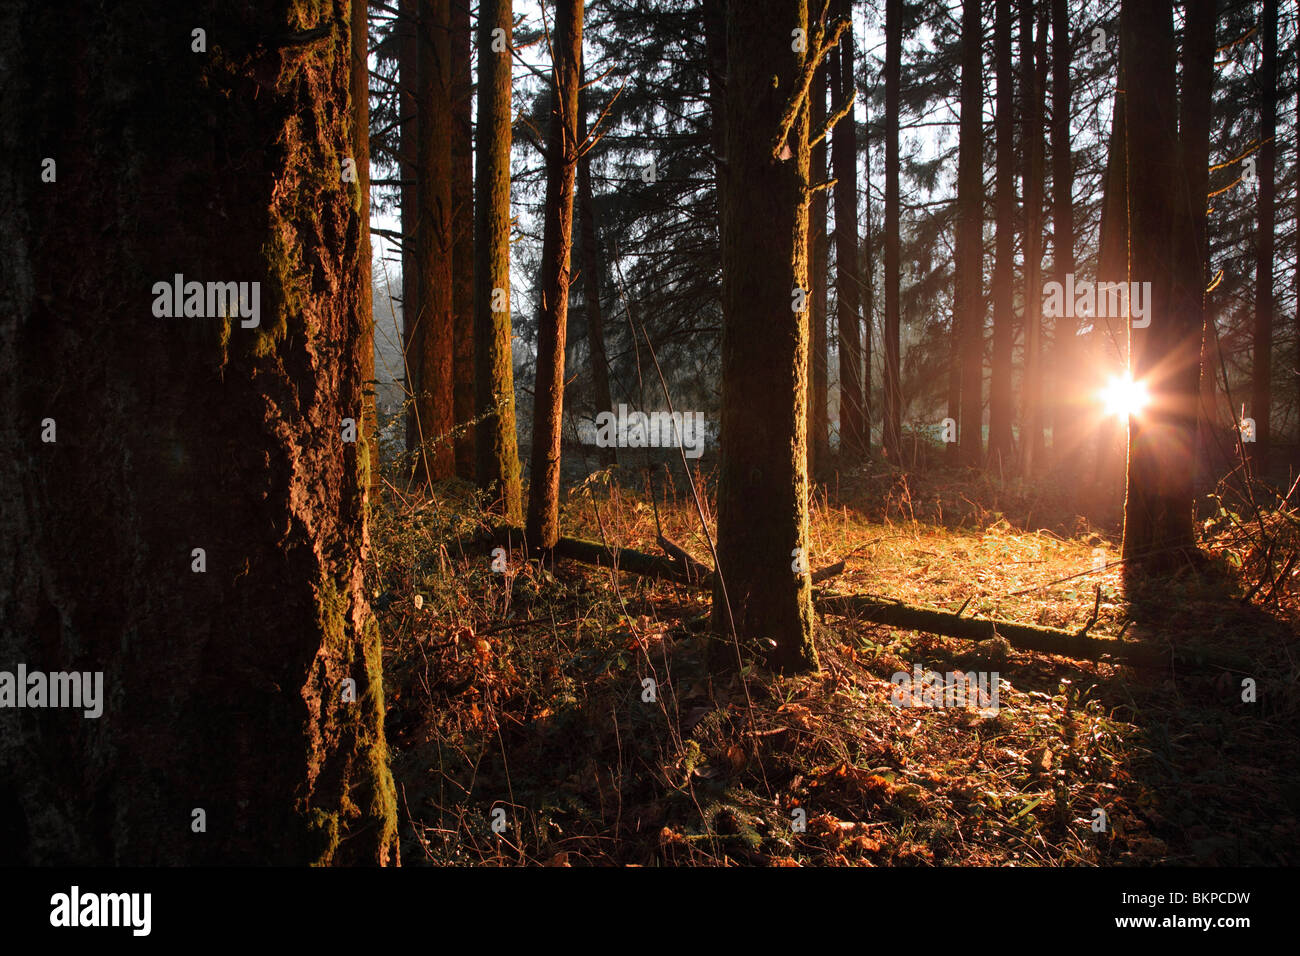 Bright light shining in forest Stock Photo